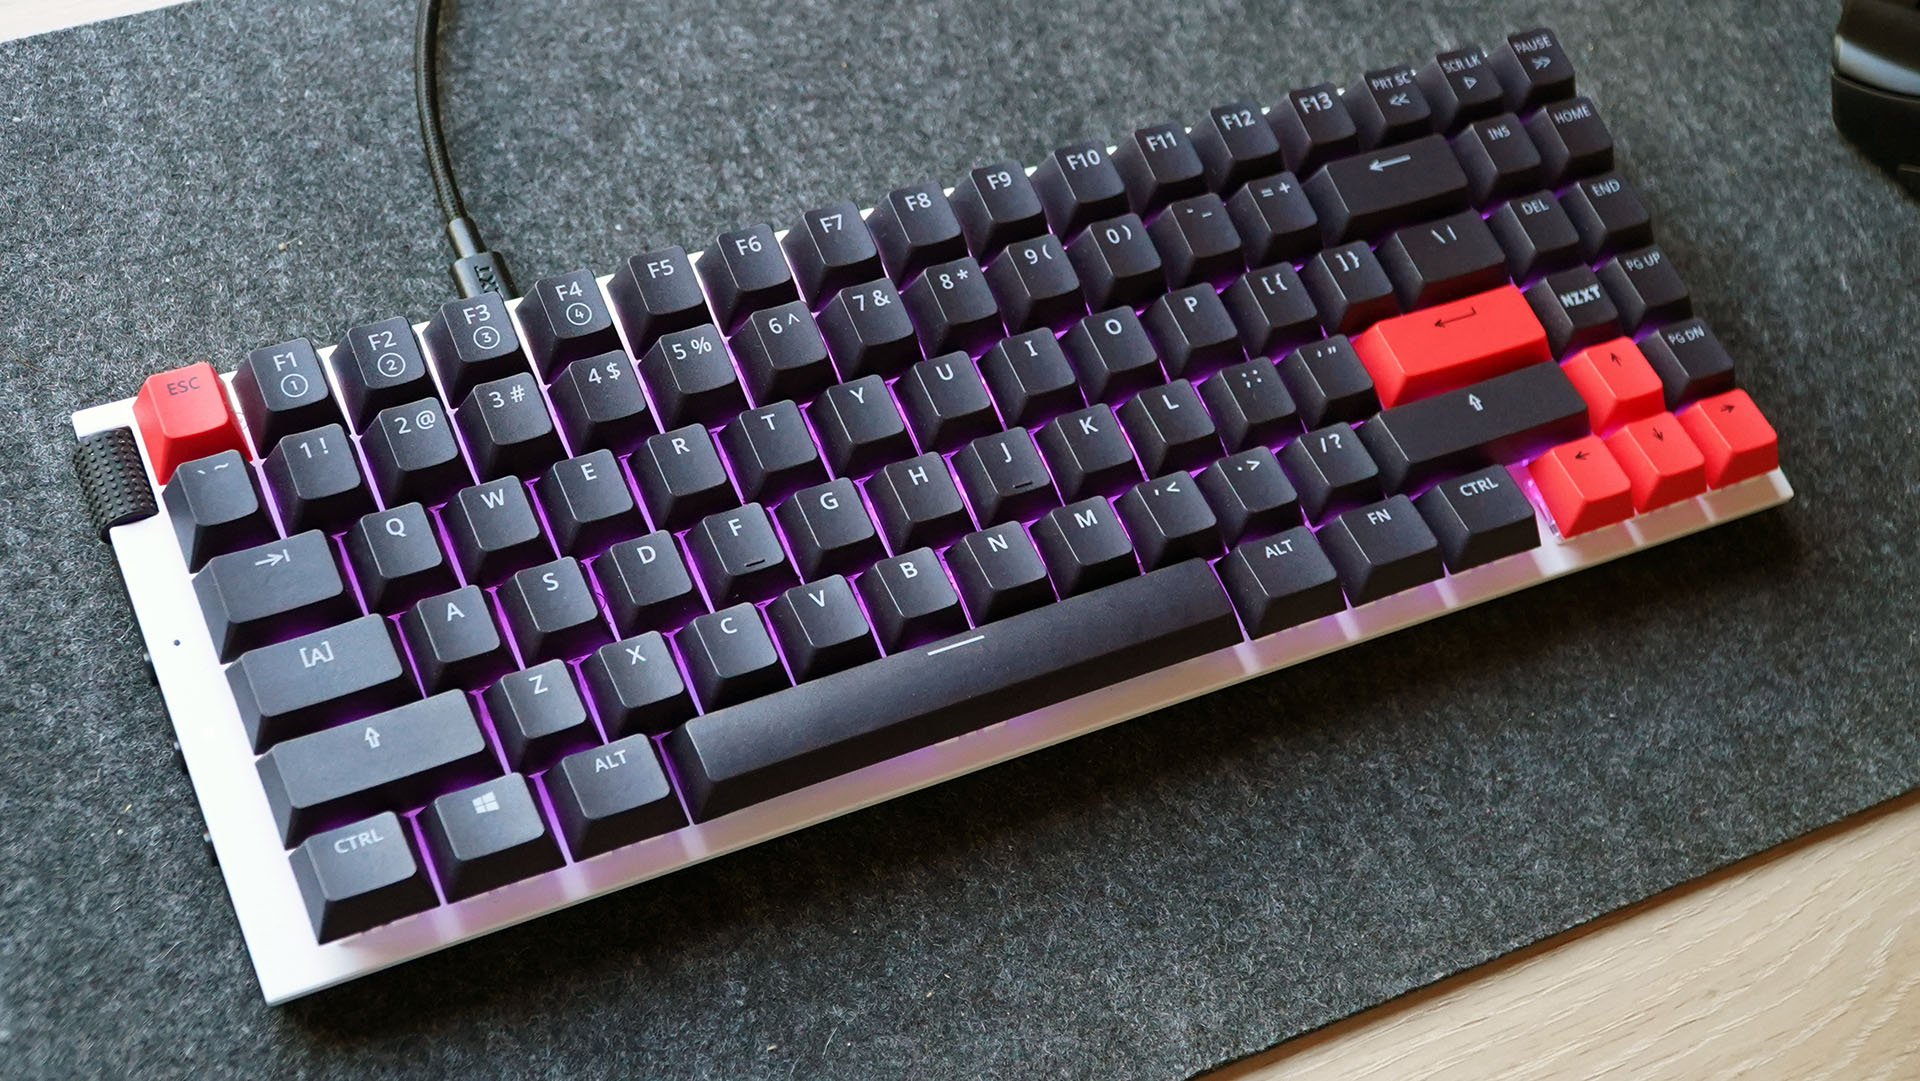 Hands-on: NZXT's Function is the premium keyboard for mech newbies